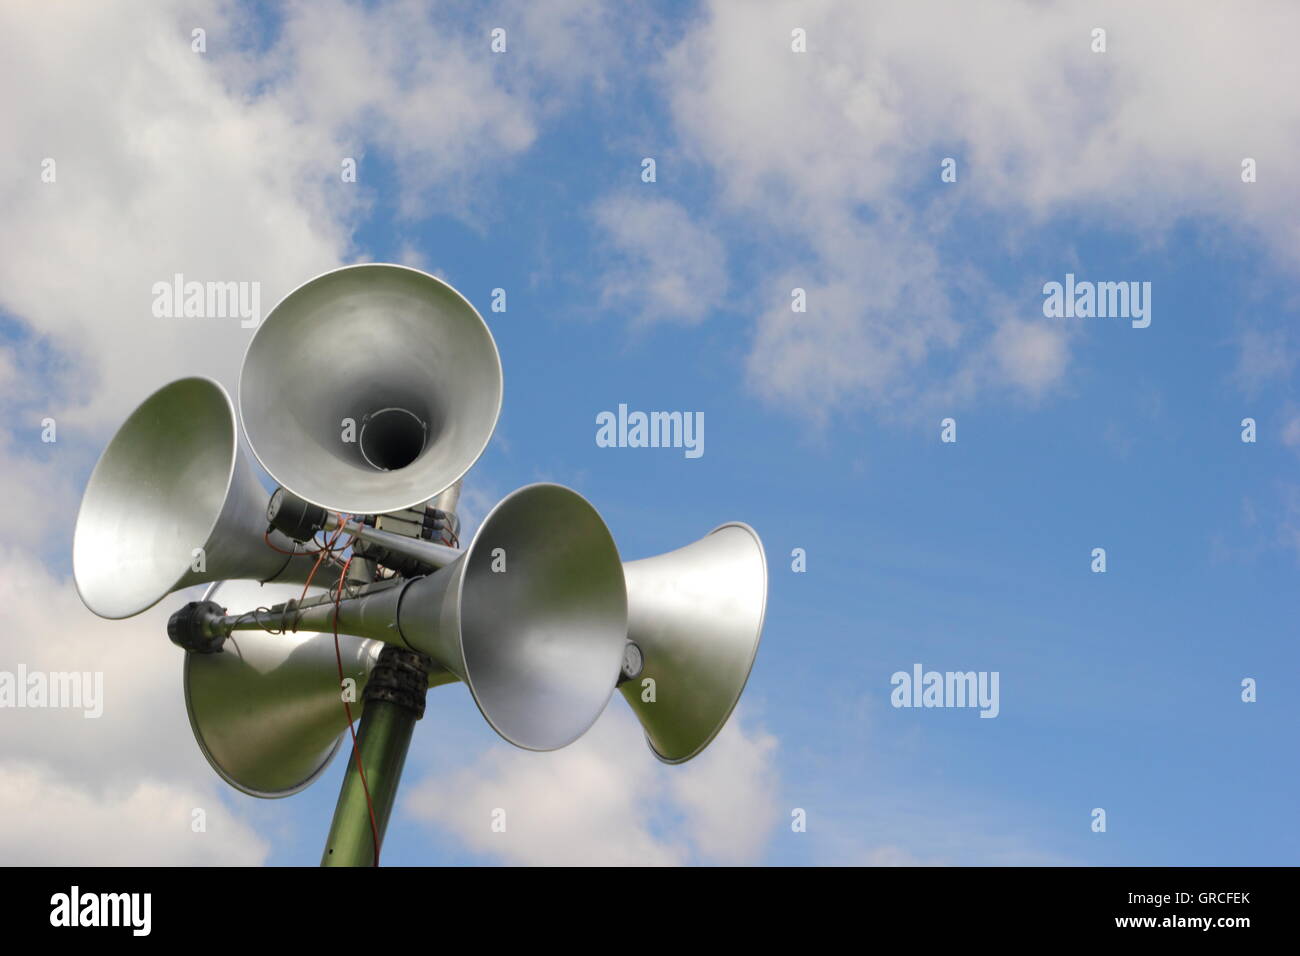 Loud speakers on a public address system against a blue sky and clouds. With copy space. Stock Photo